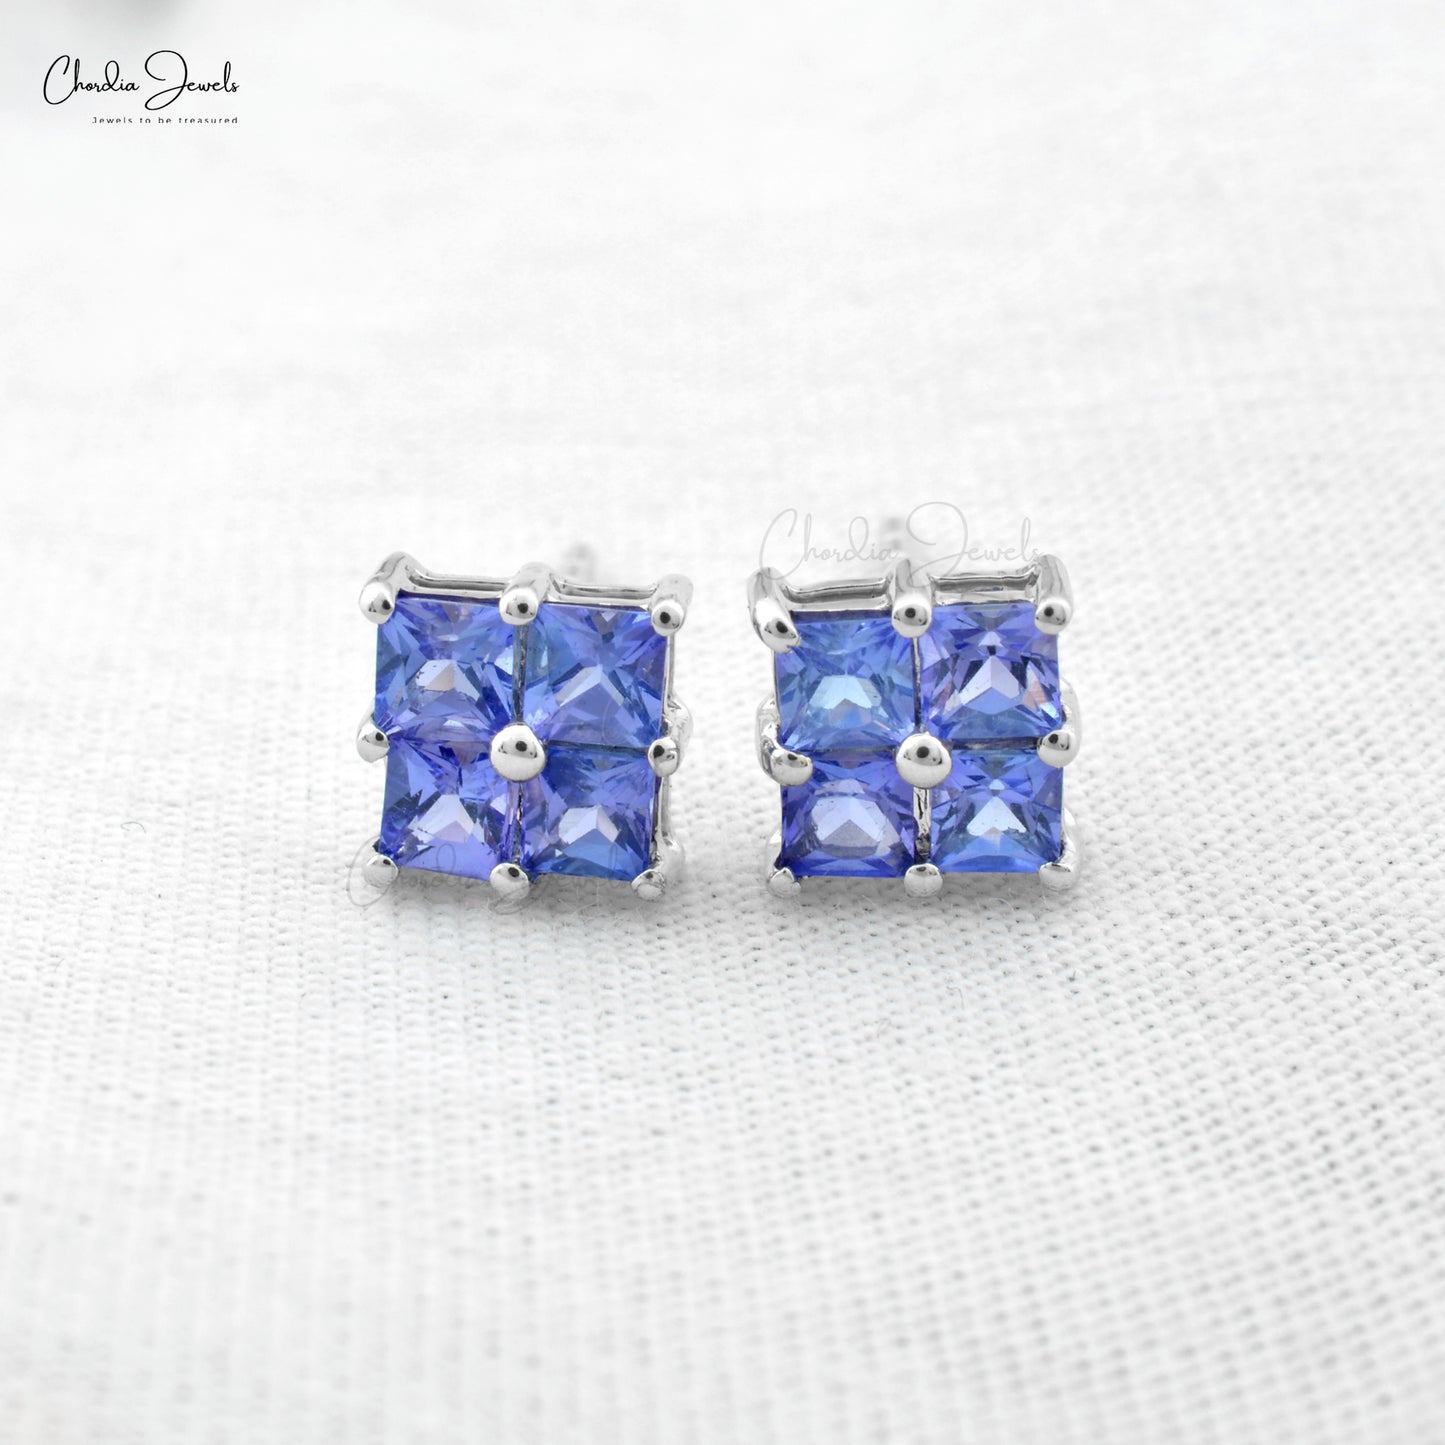 Genuine Blue Tanzanite Cluster Earrings 3mm Square Cut Push Back Studs 14k Real White Gold Tinny Jewelry For Wedding Gift